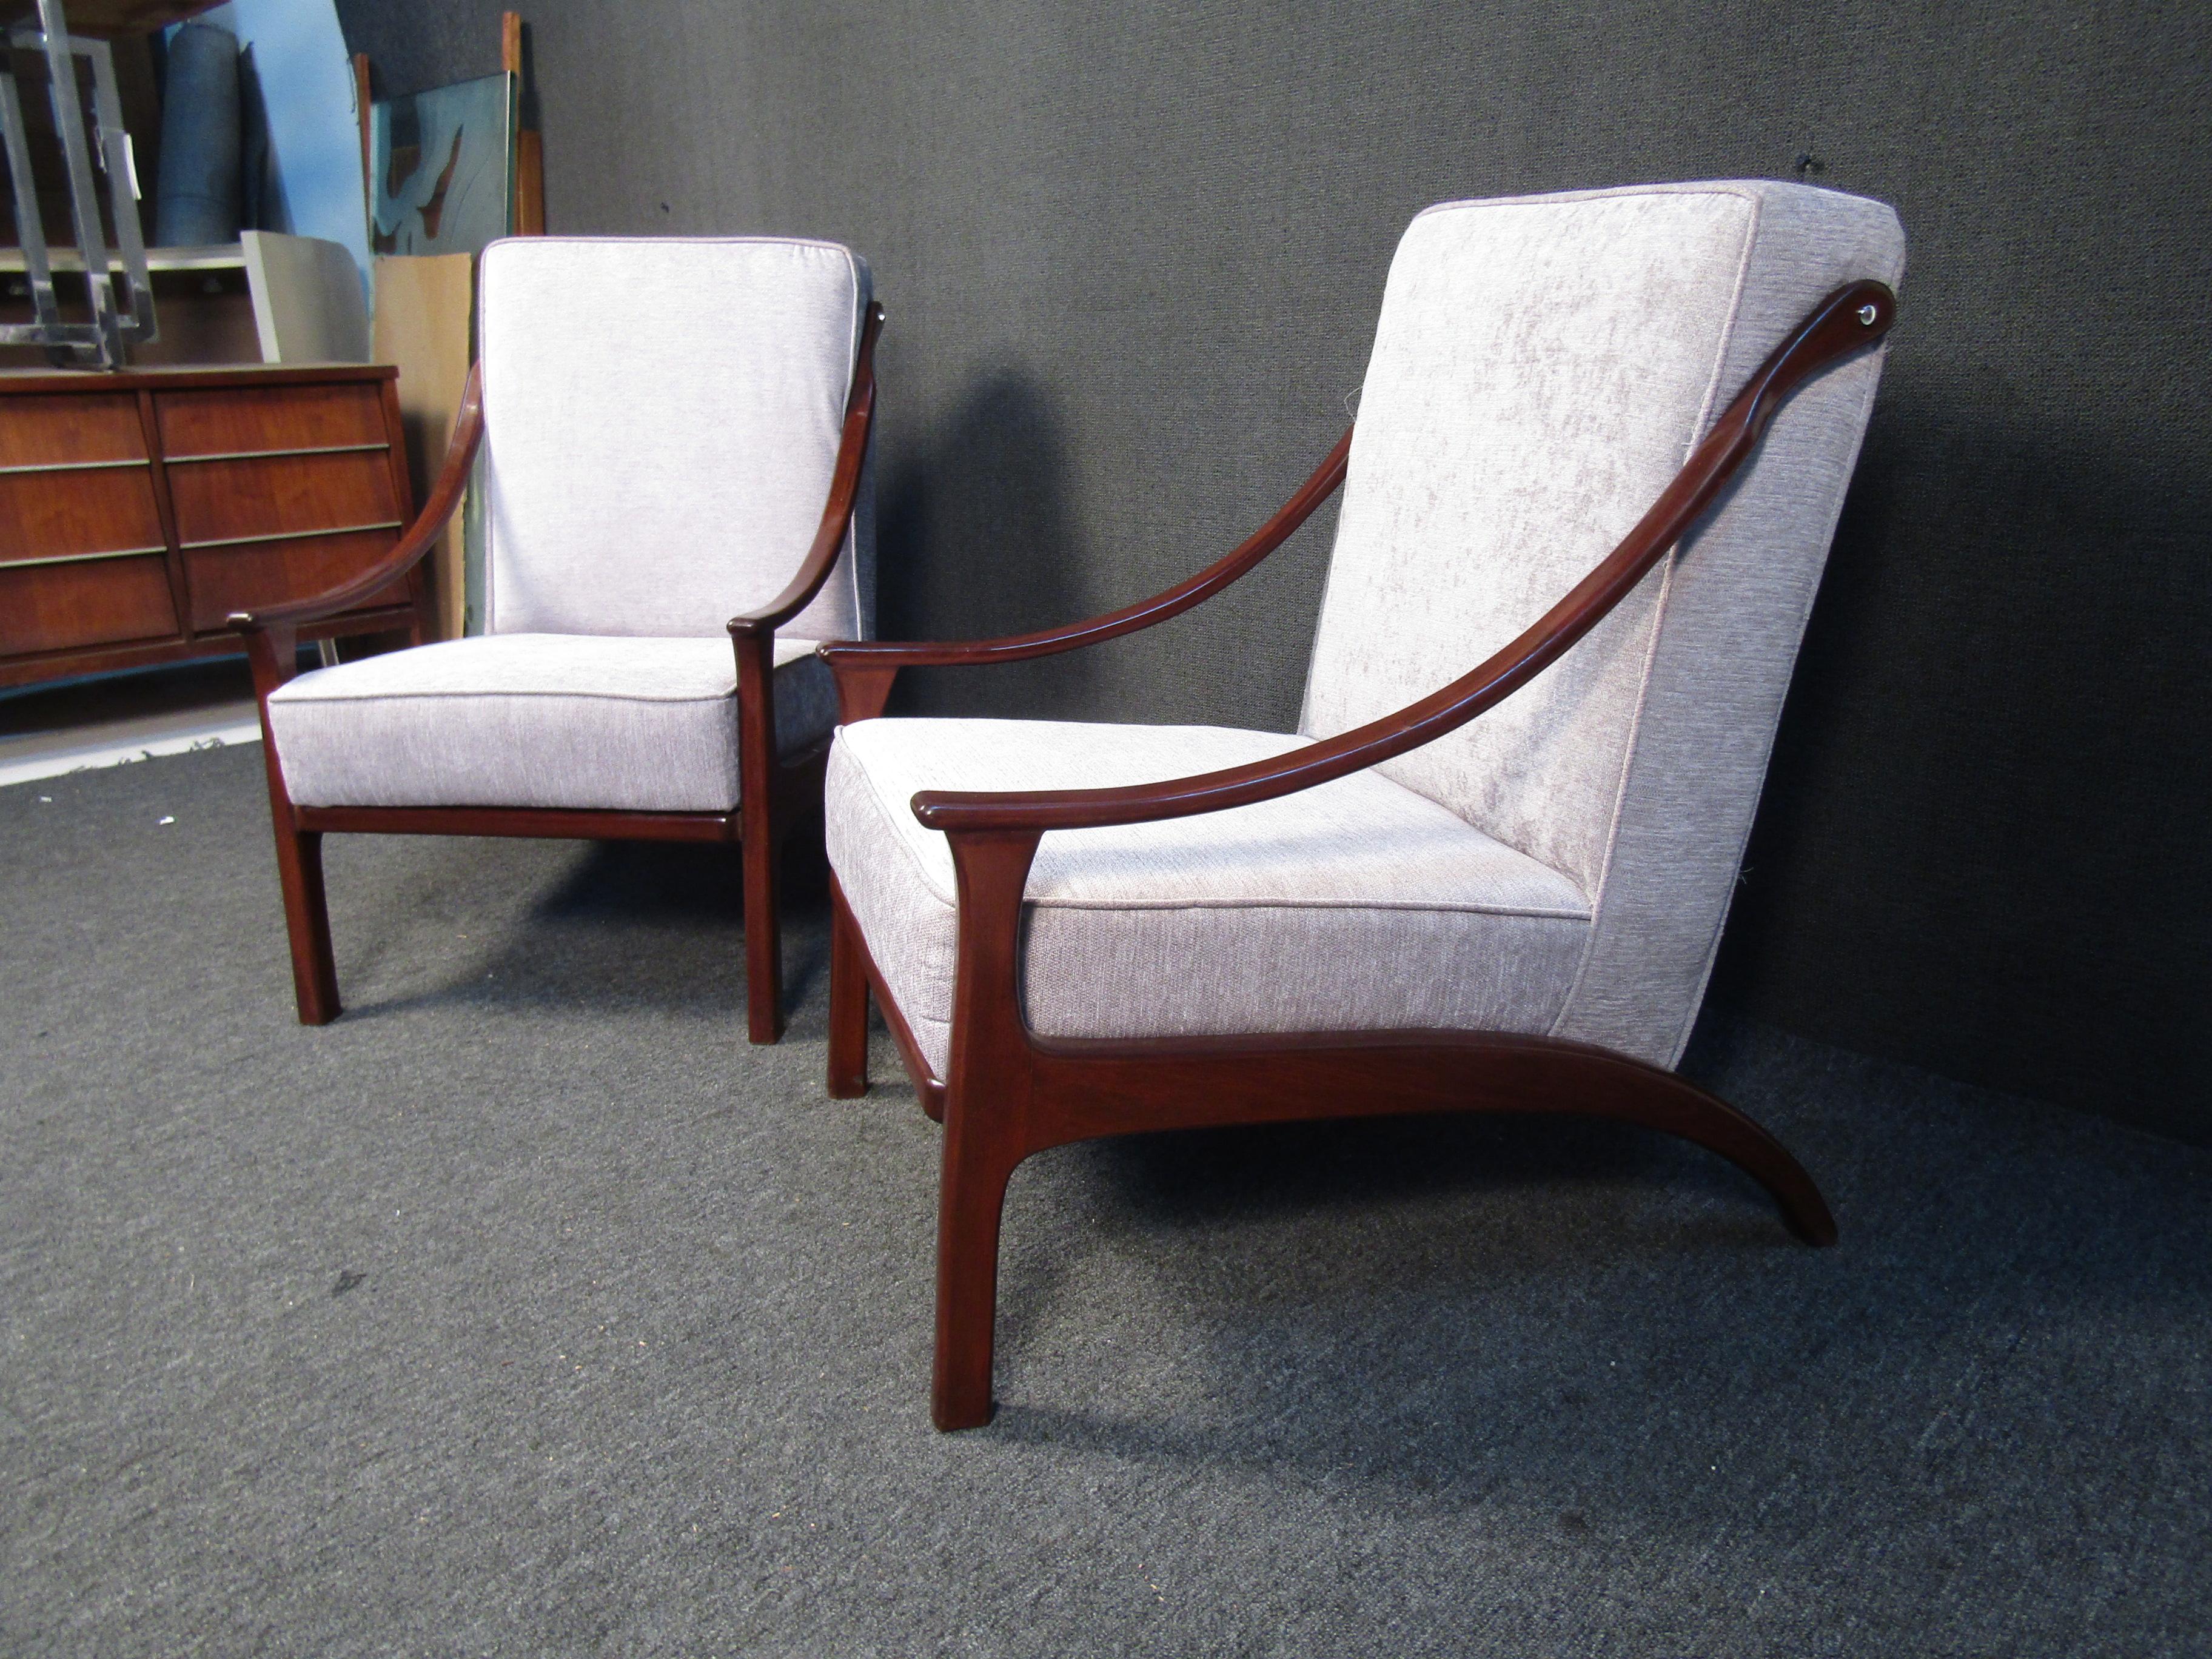 These mid-century style chairs feature a light colored upholstery and sloped wood legs/arms. A stylish pair, these chair will make a great accent to any living space. Please confirm item location (NJ or NY).